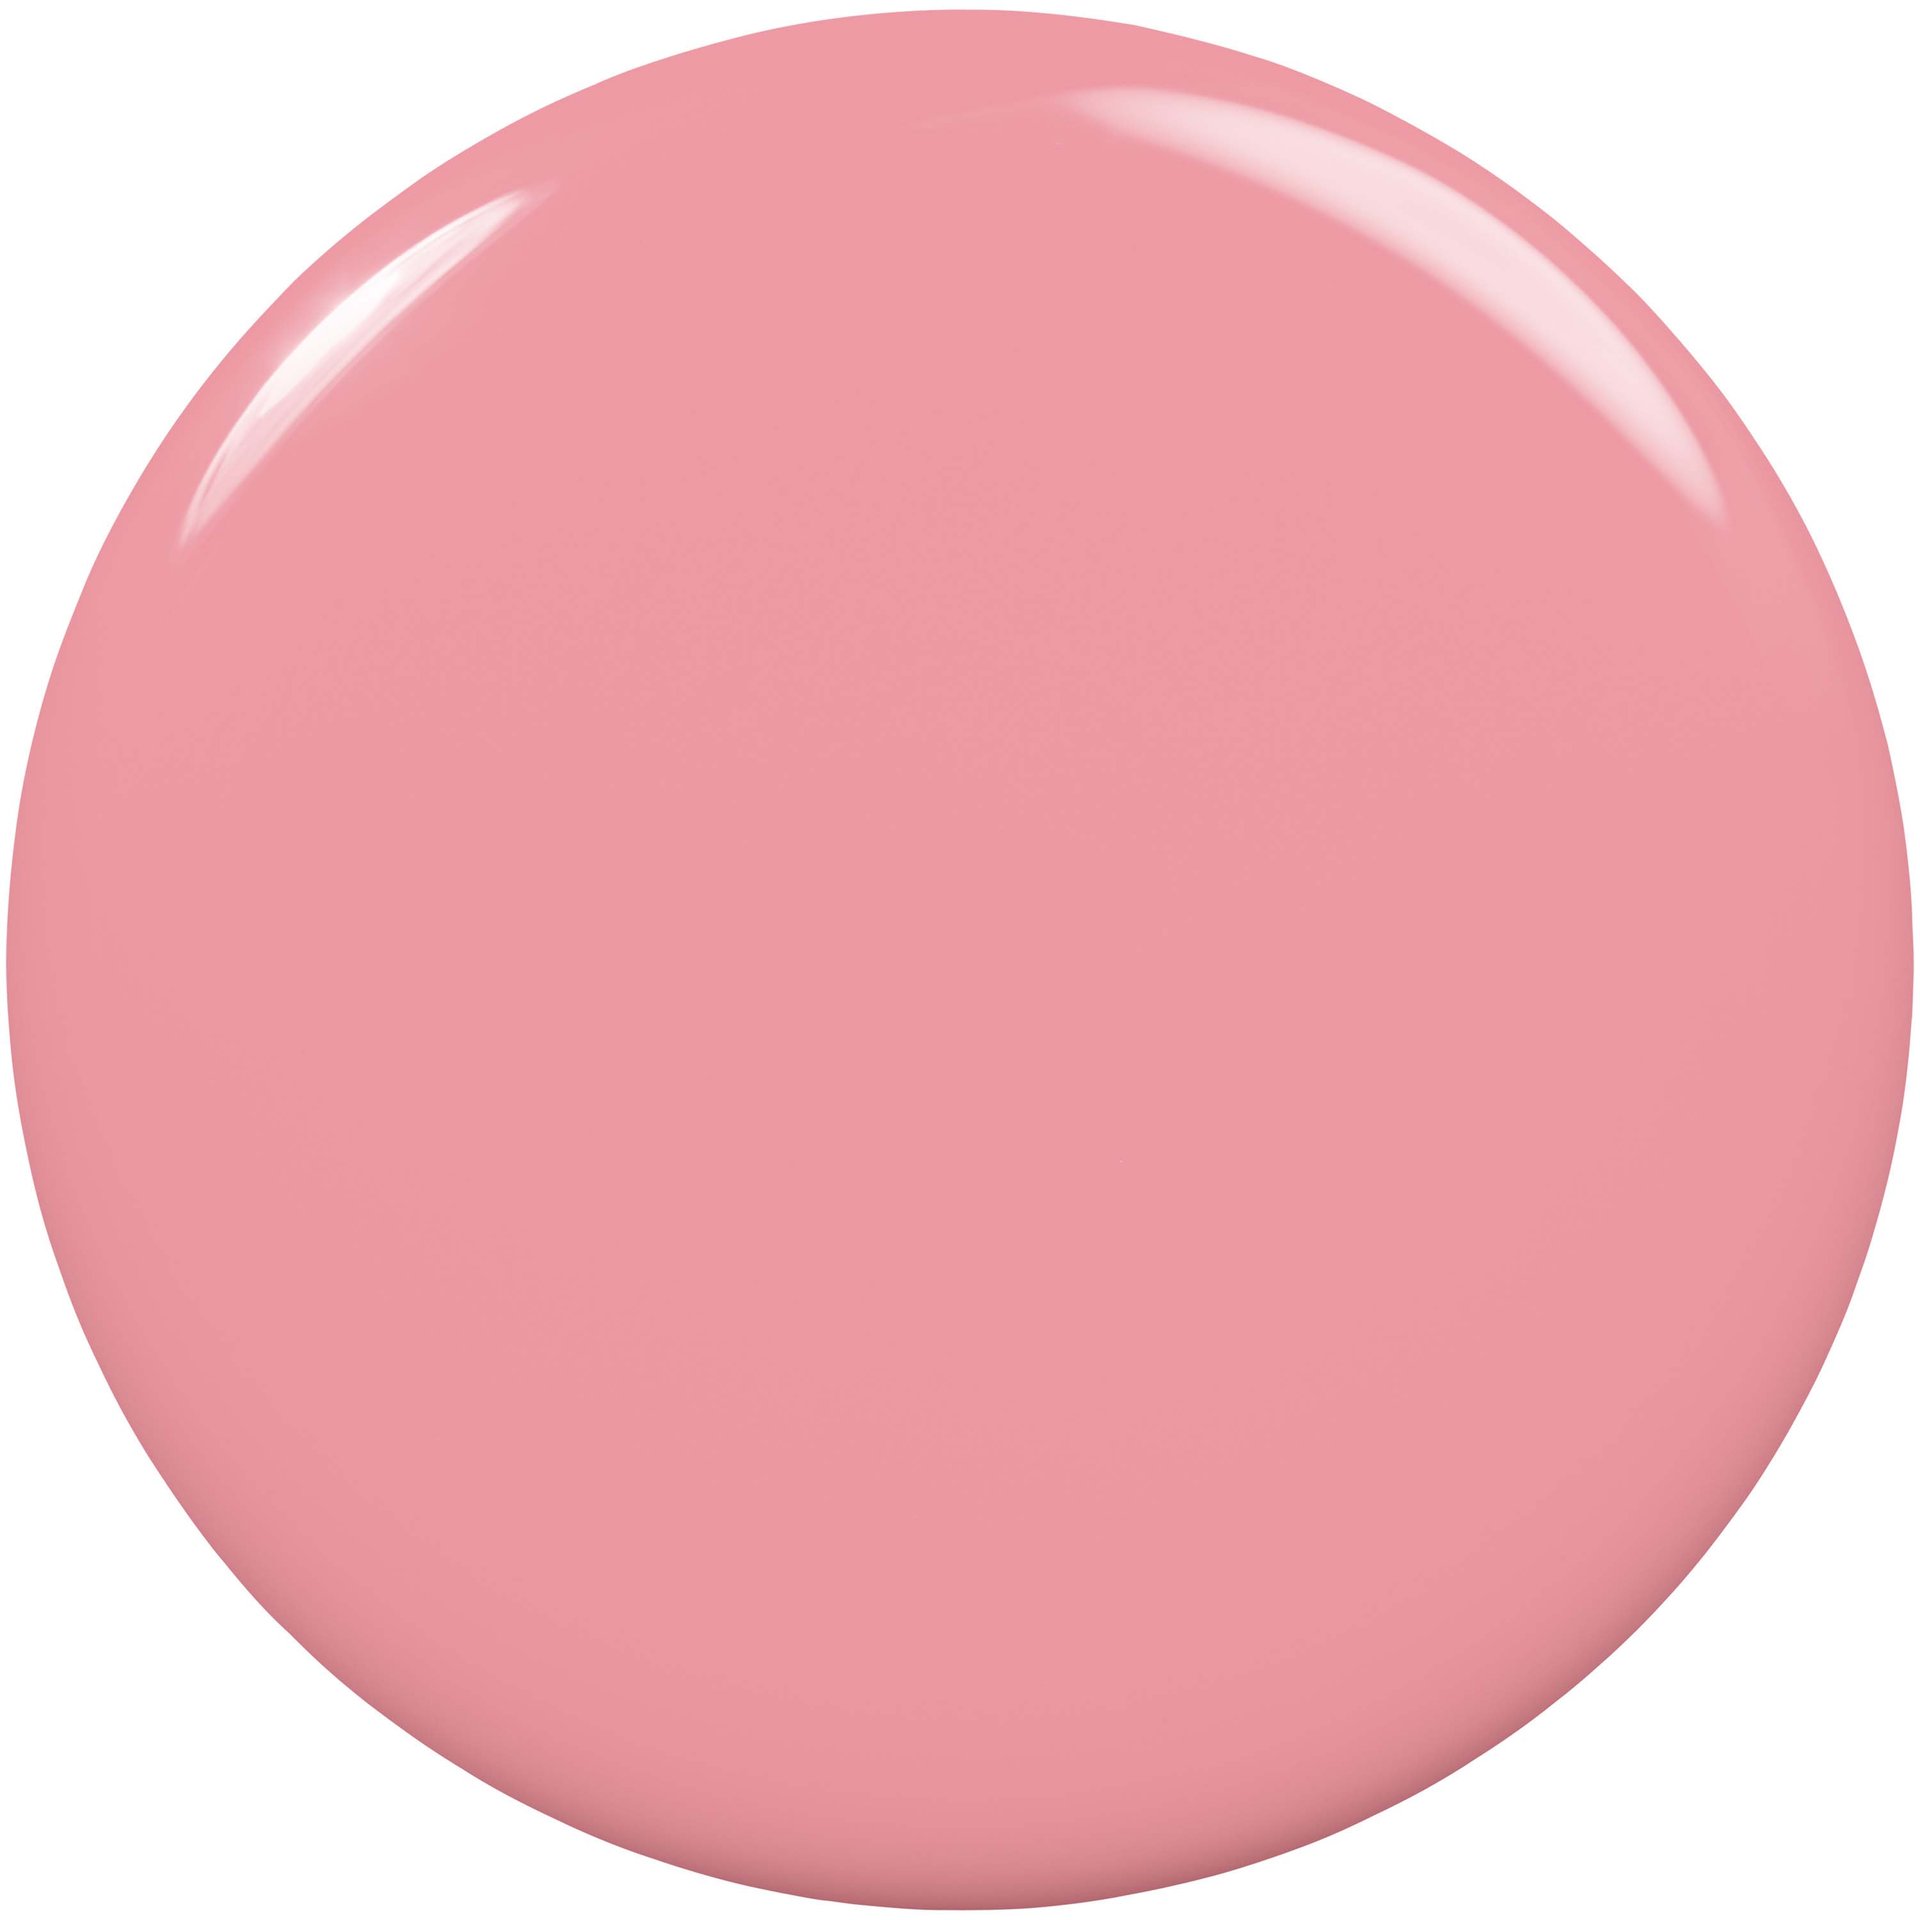 Cream - Essie Shout Polish - Hot Ice Nail Pink And